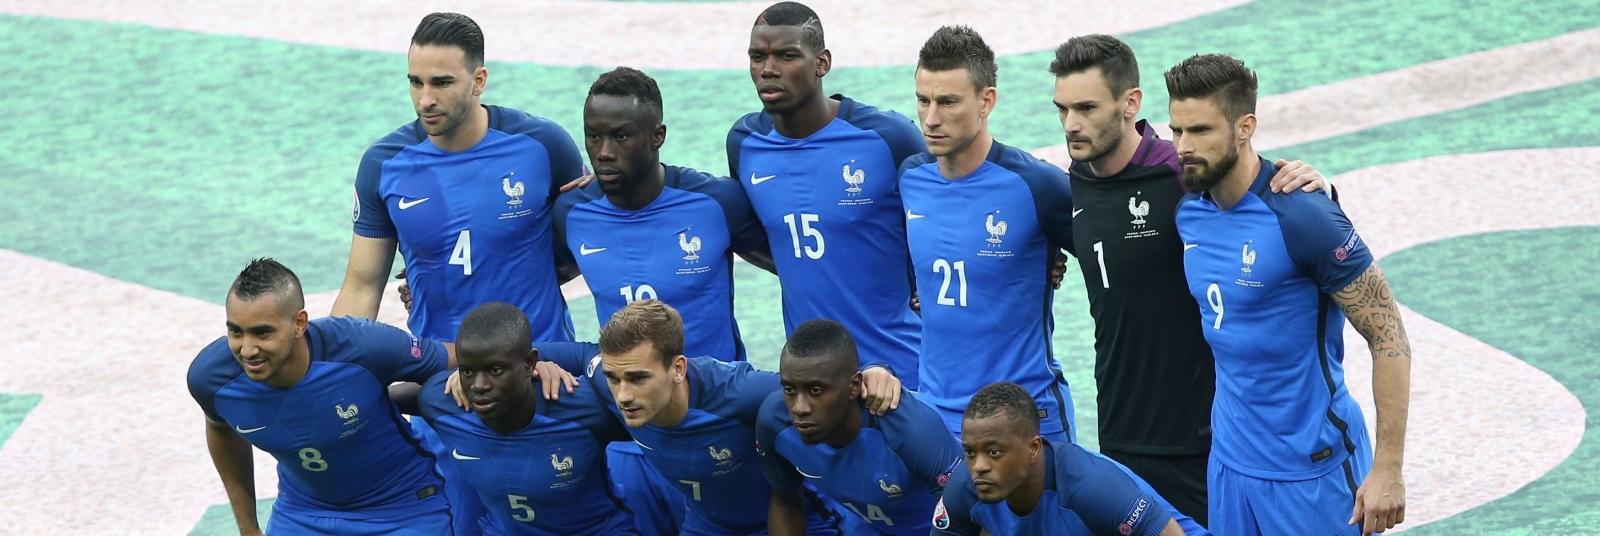 Switzerland vs France: EURO 2016 Group A Preview & Prediction